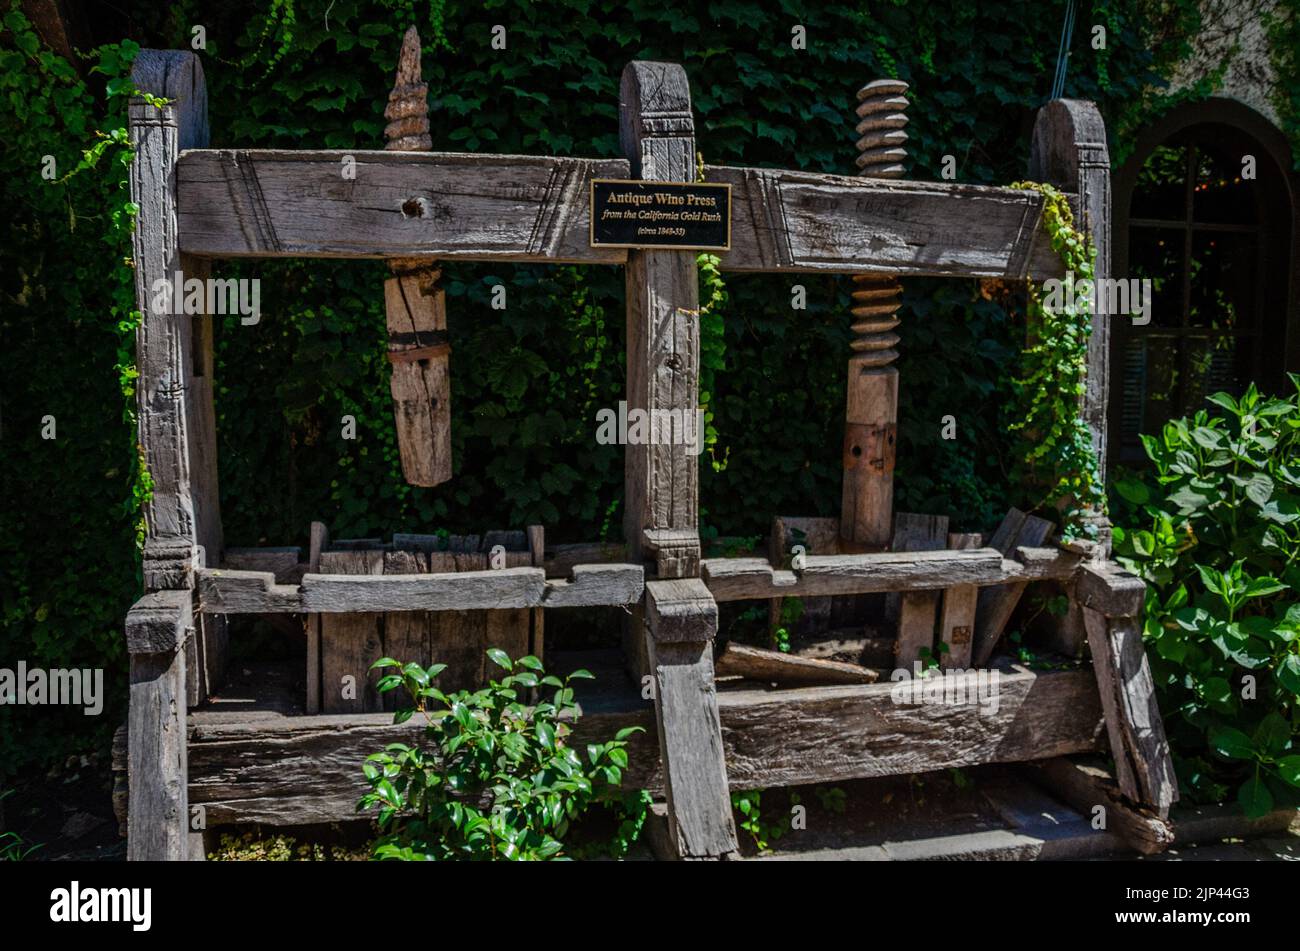 An antique wine press on display at the V. Sattui Winery in The Napa Valley in California, USA Stock Photo